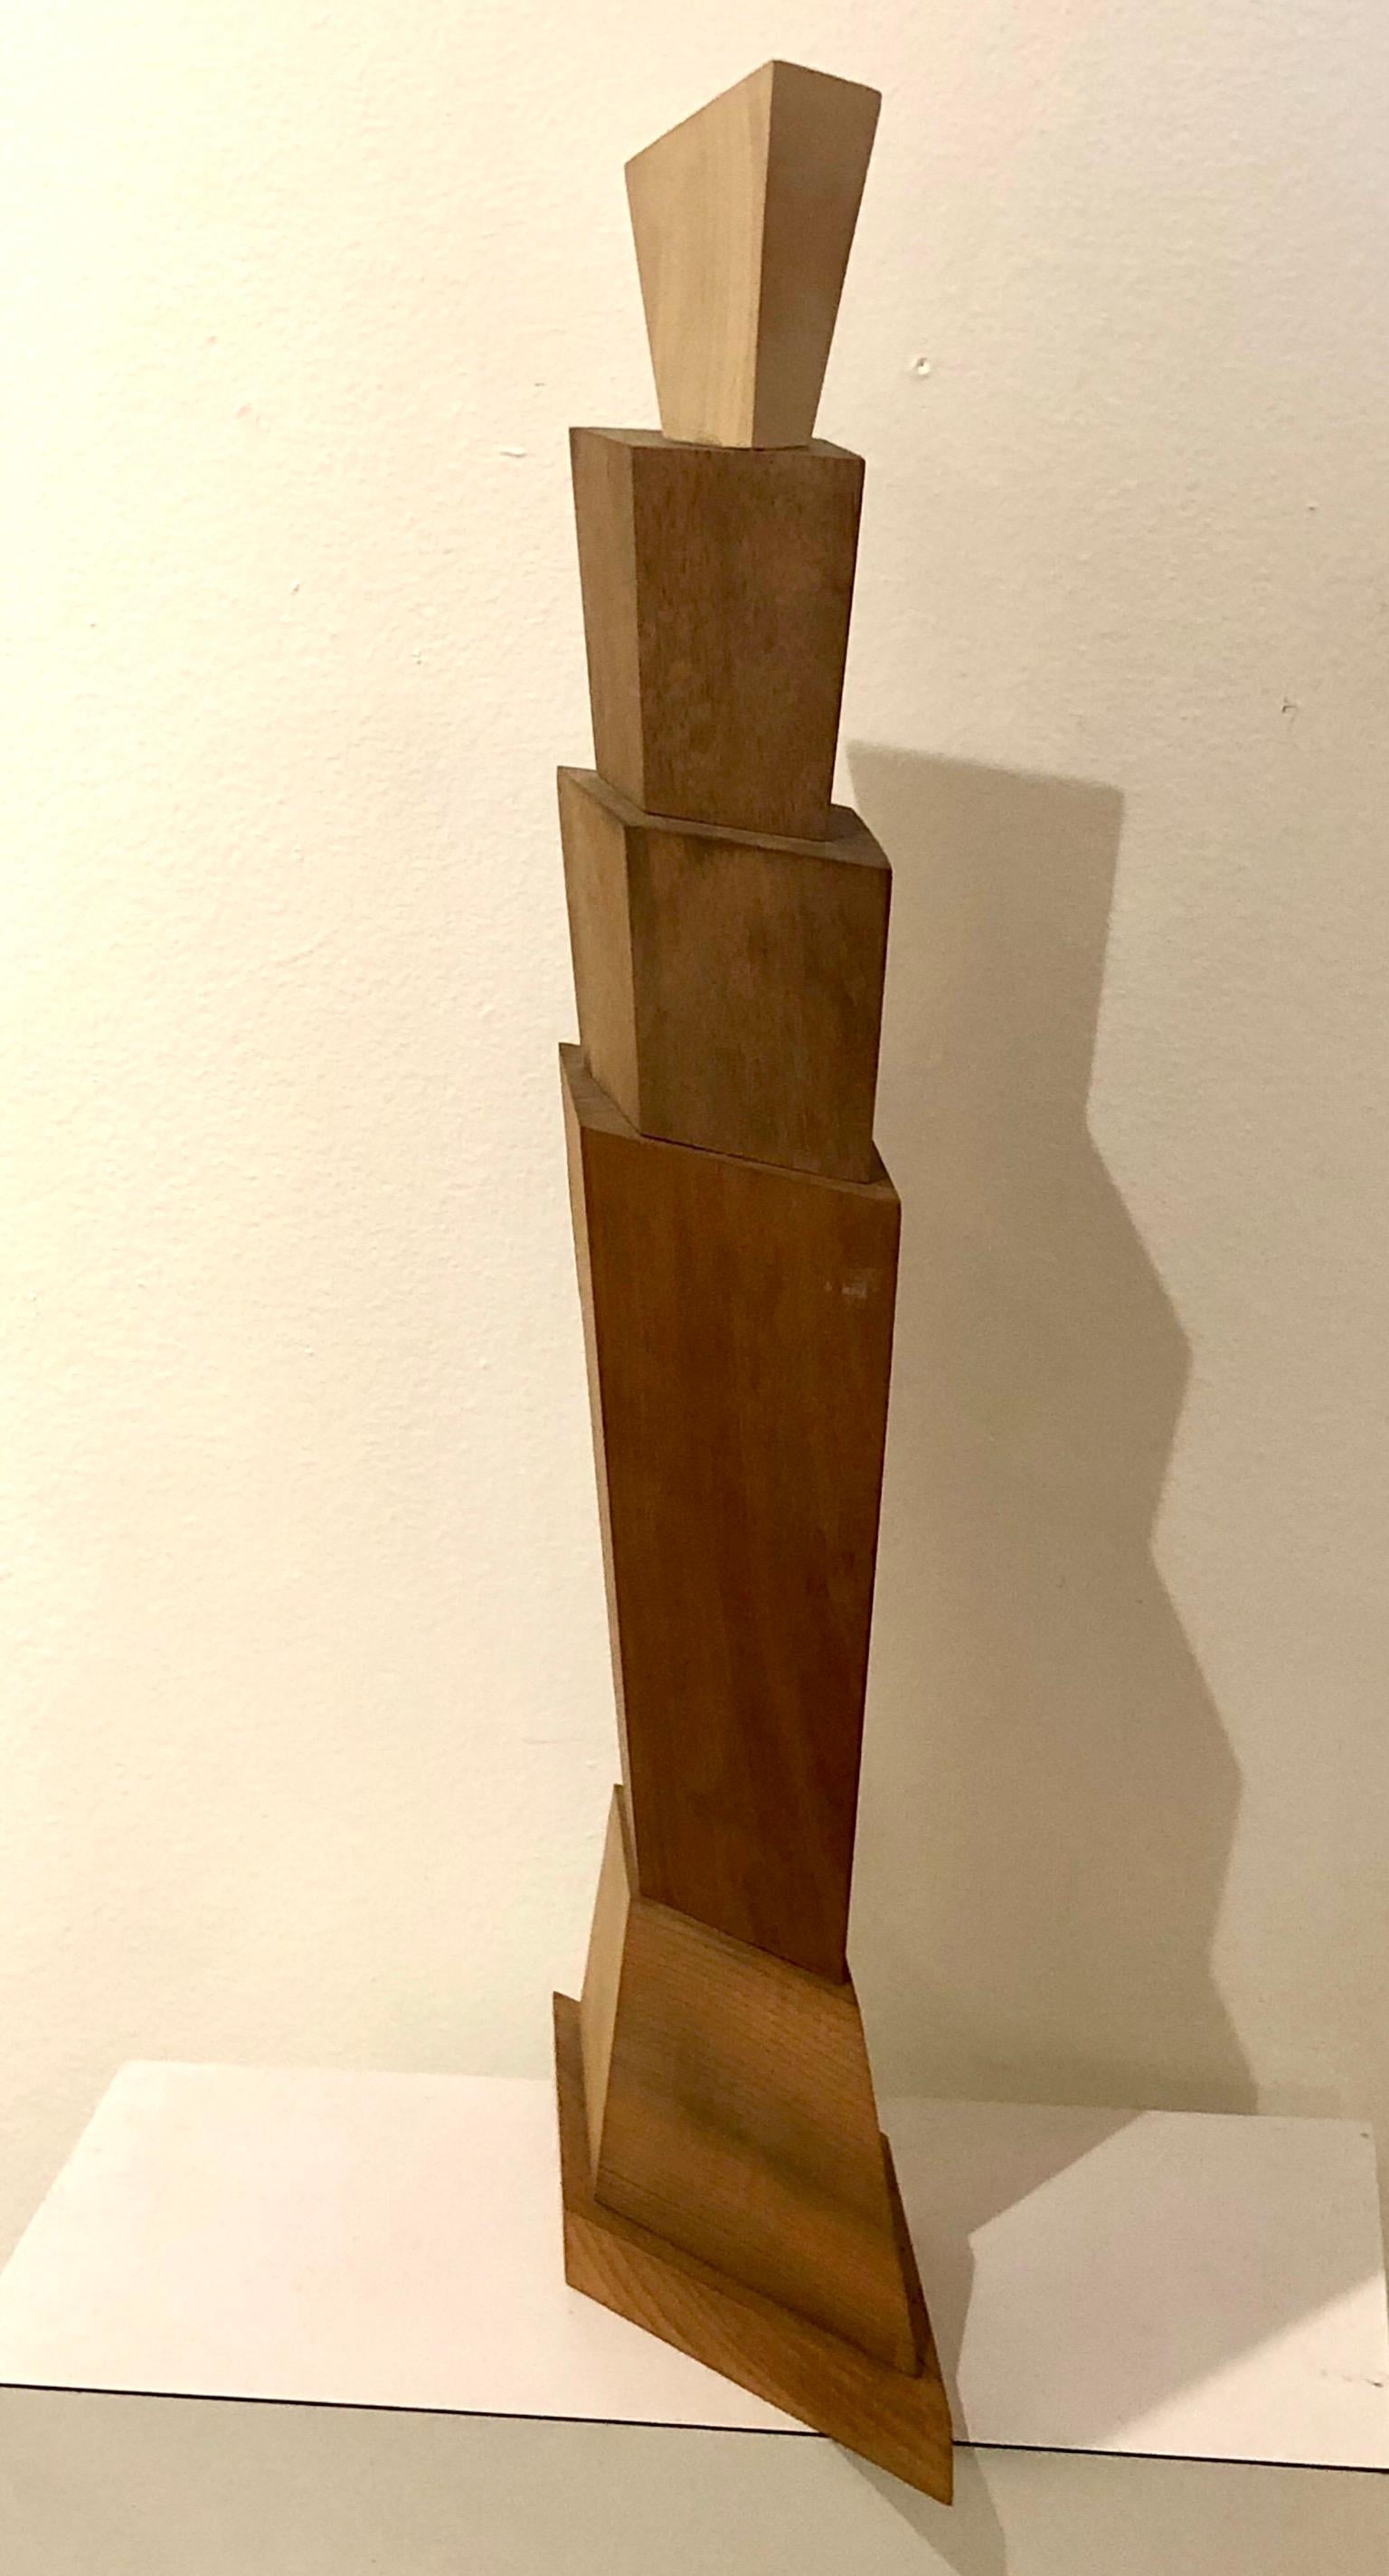 Post-Modern Postmodern Abstract Sculpture by La Jolla Artist John Rogers Signed/Dated 2003 For Sale